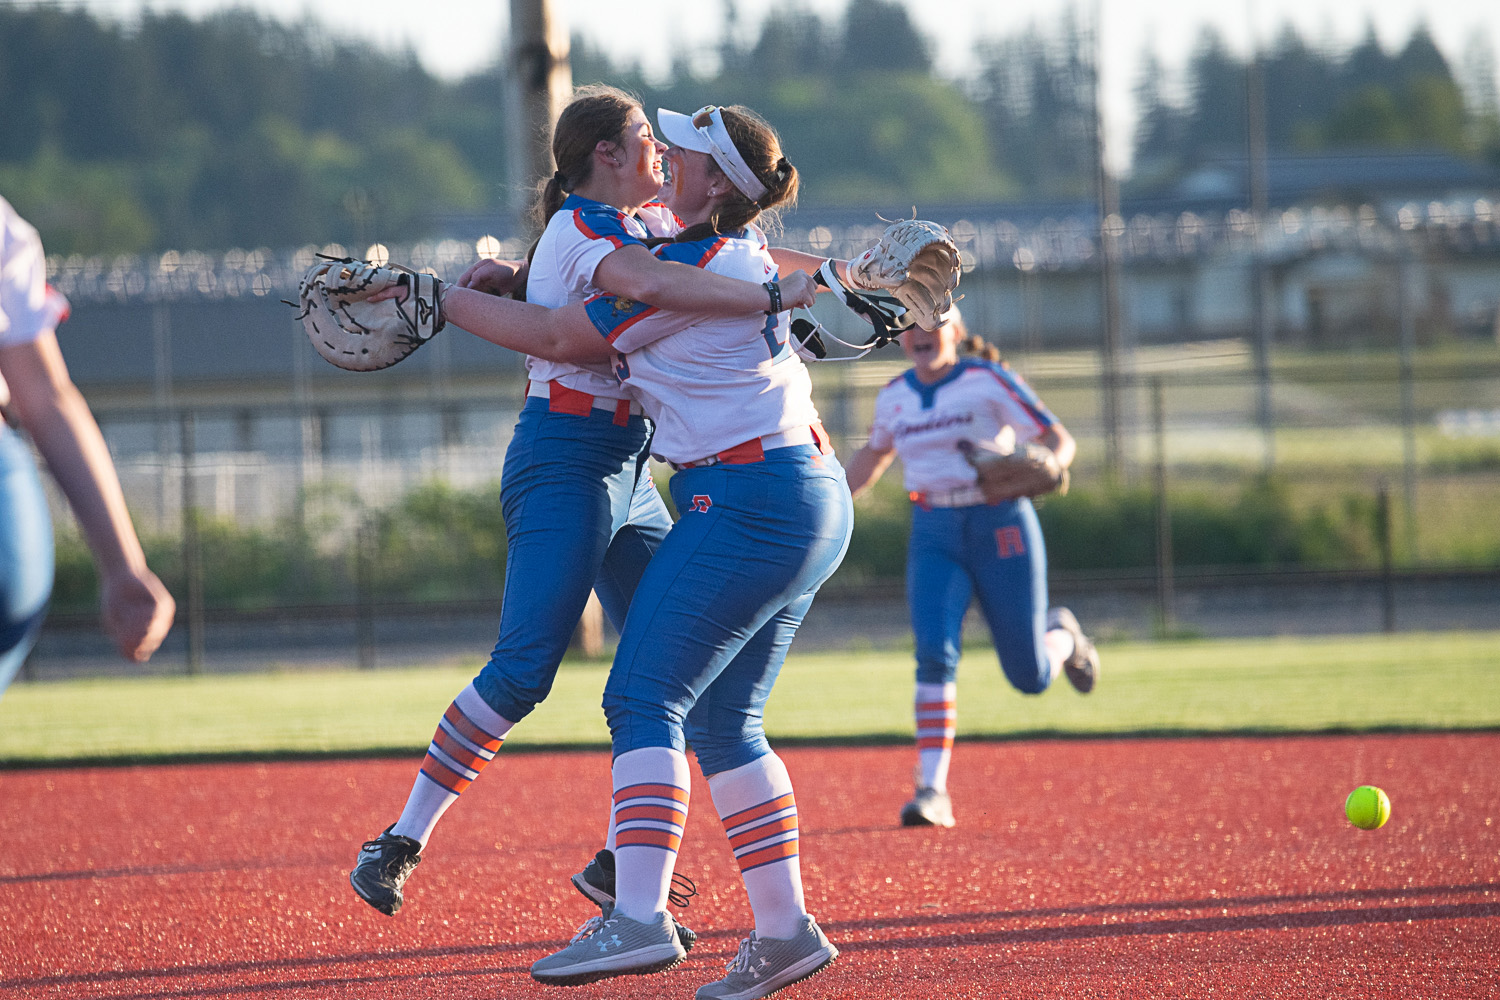 Elizabeth Peery hugs Maizy Whitlow after the final out of Ridgefield's 4-3 win over Tumwater in the semifinals of the 2A District 4 tournament, May 18 at Rec Park in Chehalis.